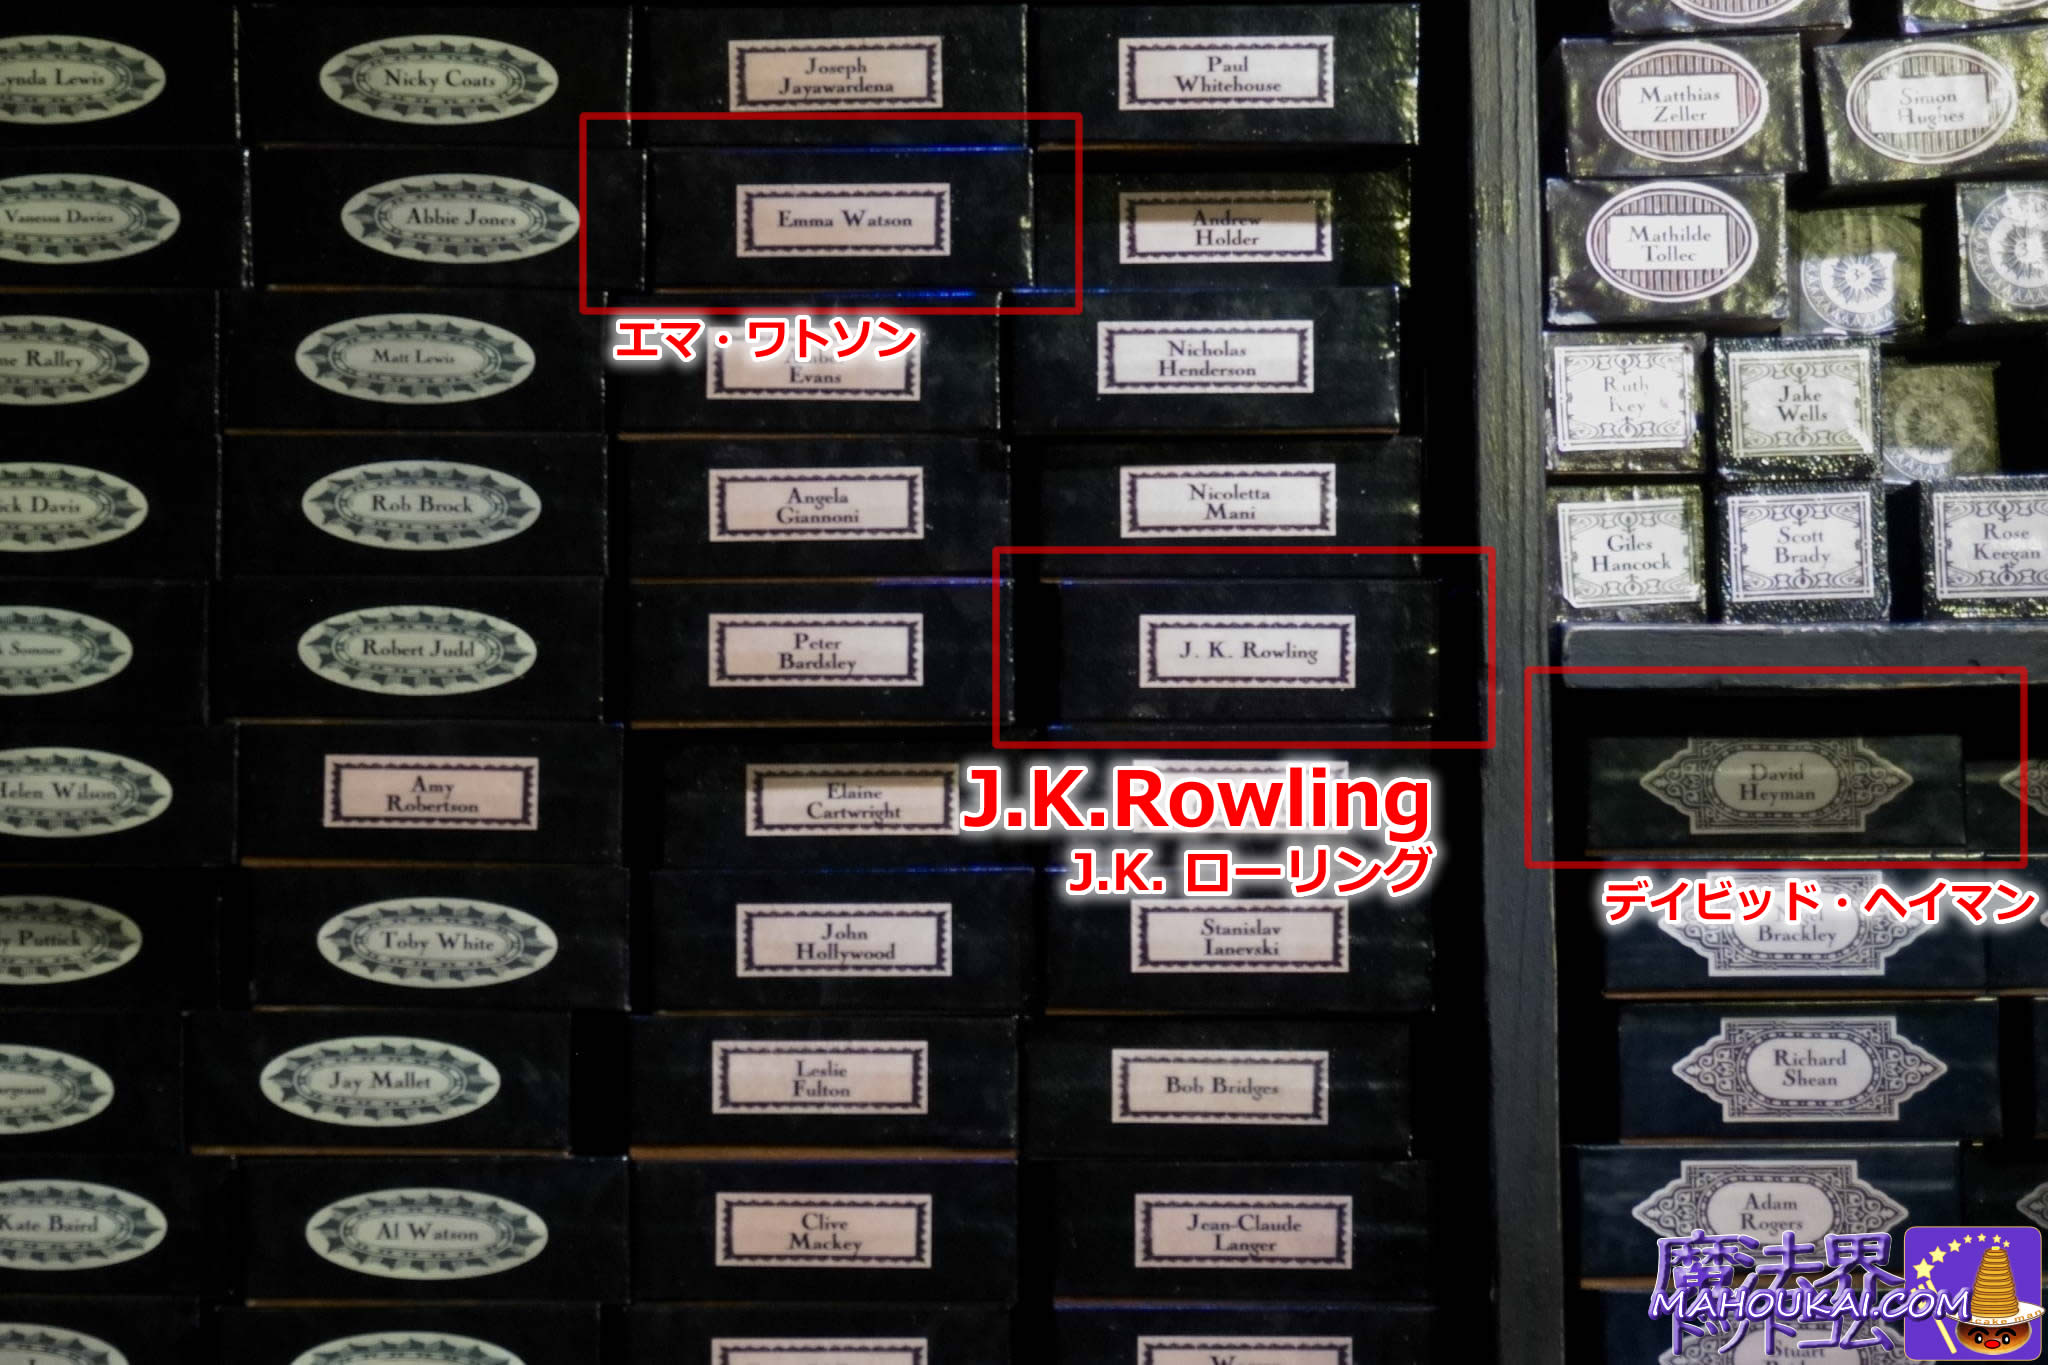 31 Jul Harry Potter and Rowling Happee Birthdae 31st 魔法界ドットコム Harry  Potter  Fantastic Beasts Fansites